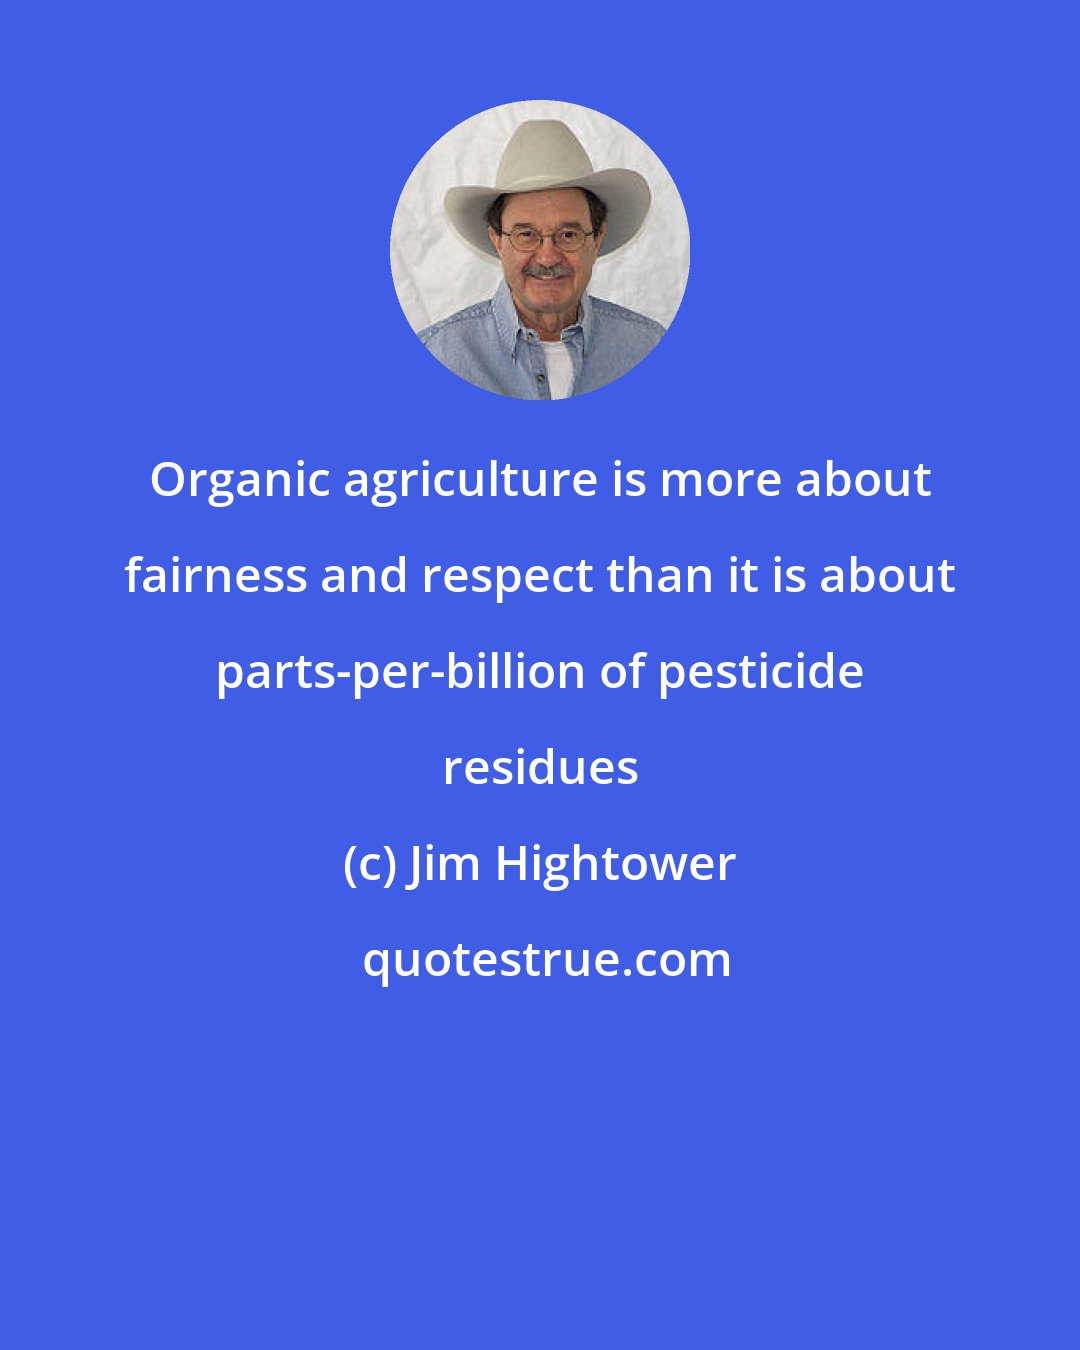 Jim Hightower: Organic agriculture is more about fairness and respect than it is about parts-per-billion of pesticide residues